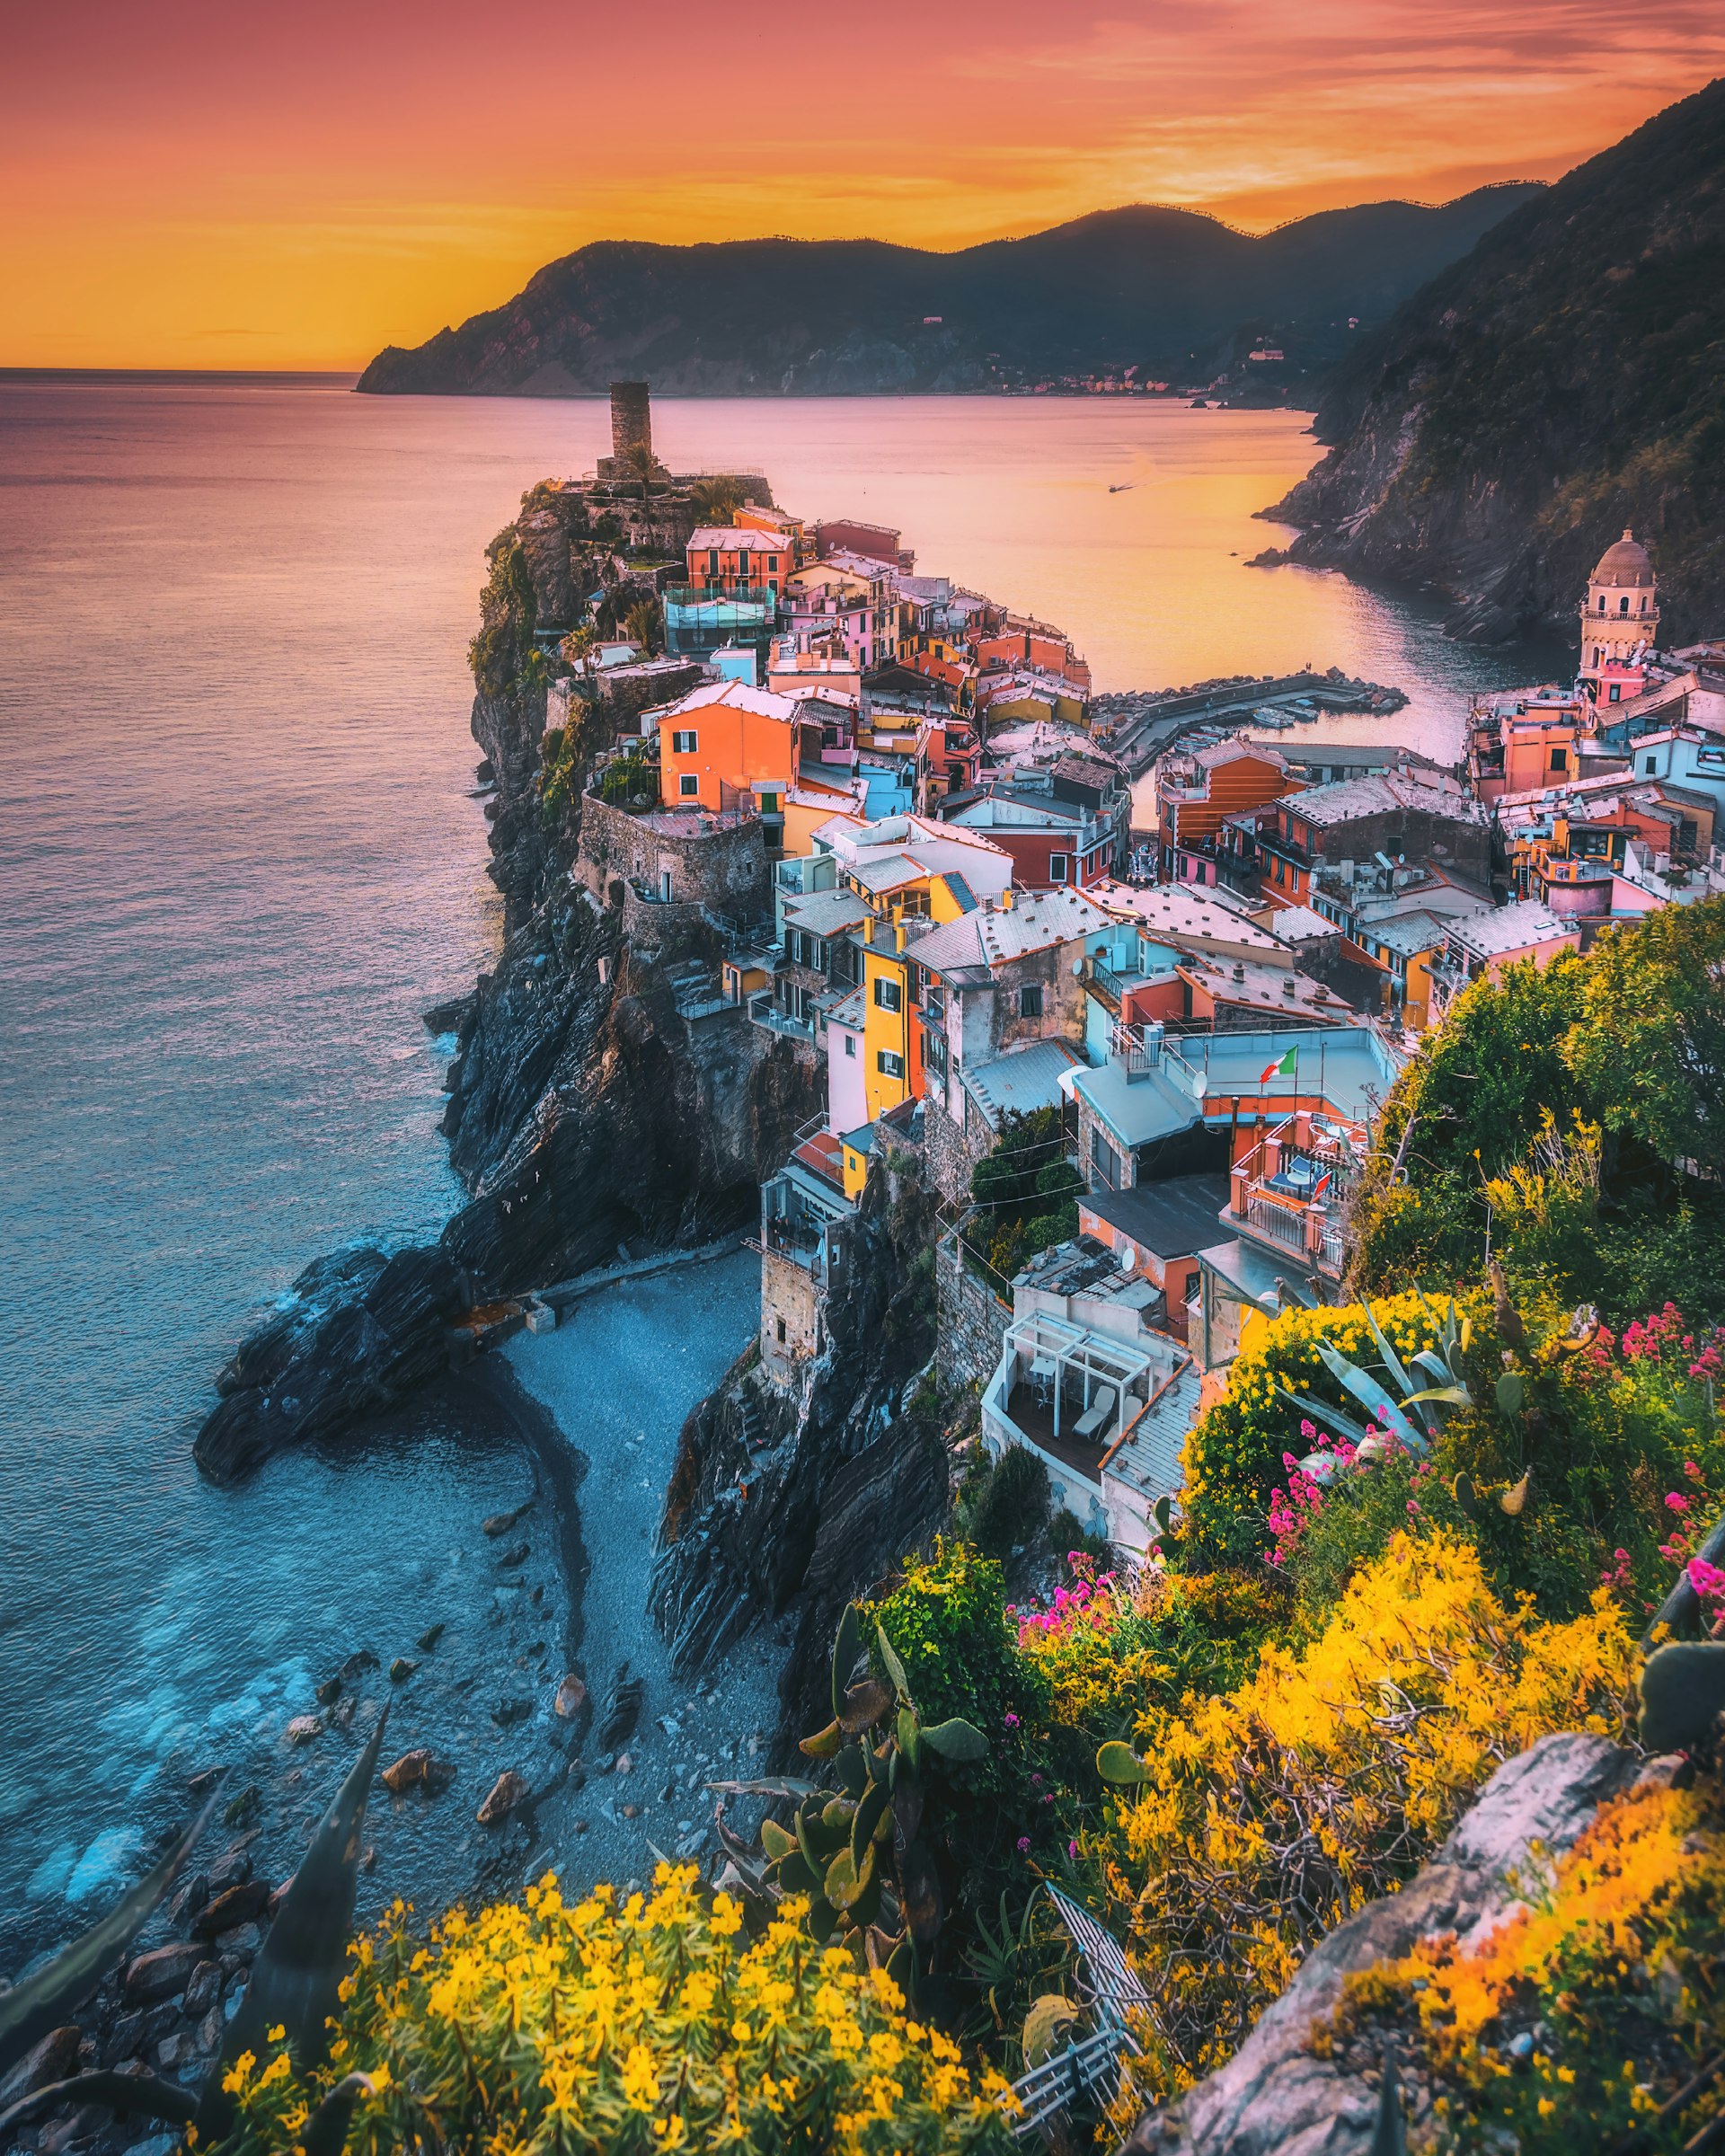 A colorful sunset in Vernazza in Cinque Terre.